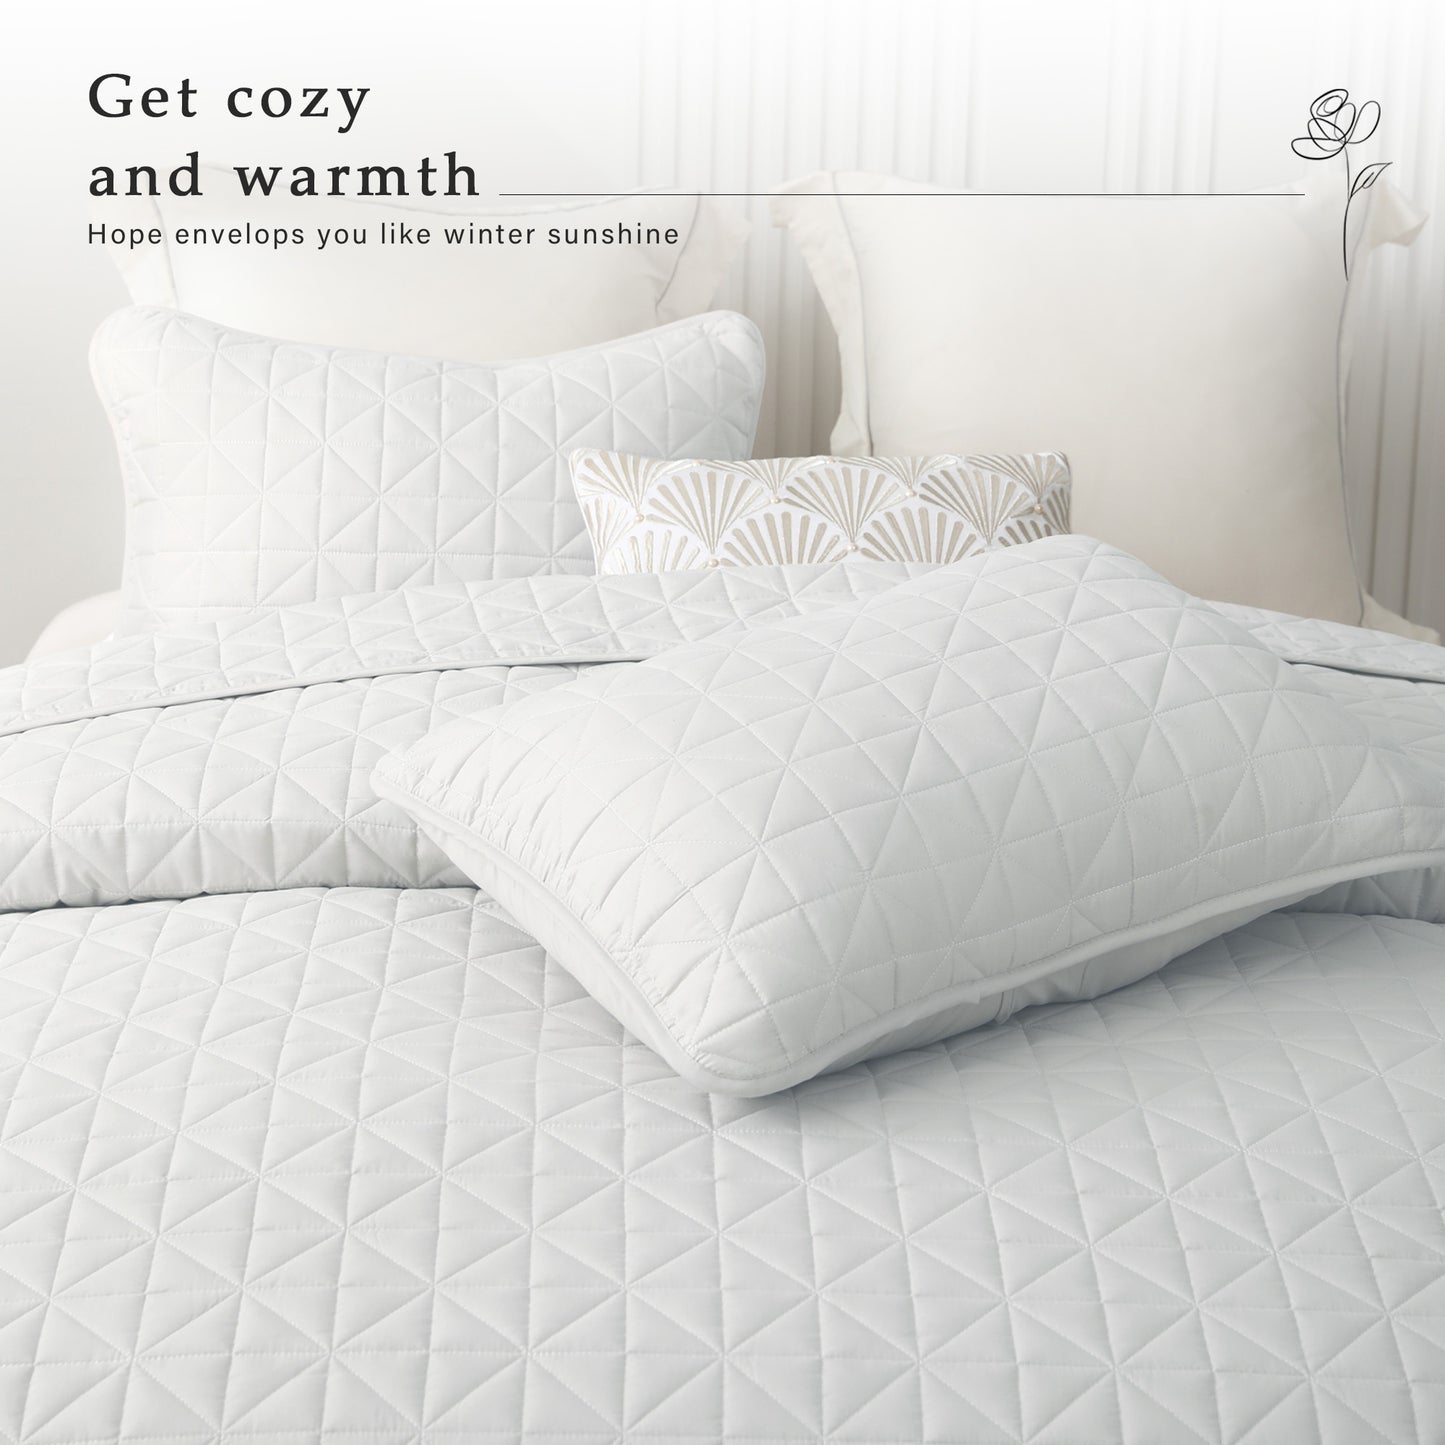 Exclusivo Mezcla King Size Quilt Bedding Set for All Seasons, Lightweight Soft White Quilts King Size Bedspreads Coverlets Bed Cover with Geometric Stitched Pattern, (1 Quilt, 2 Pillow Shams)